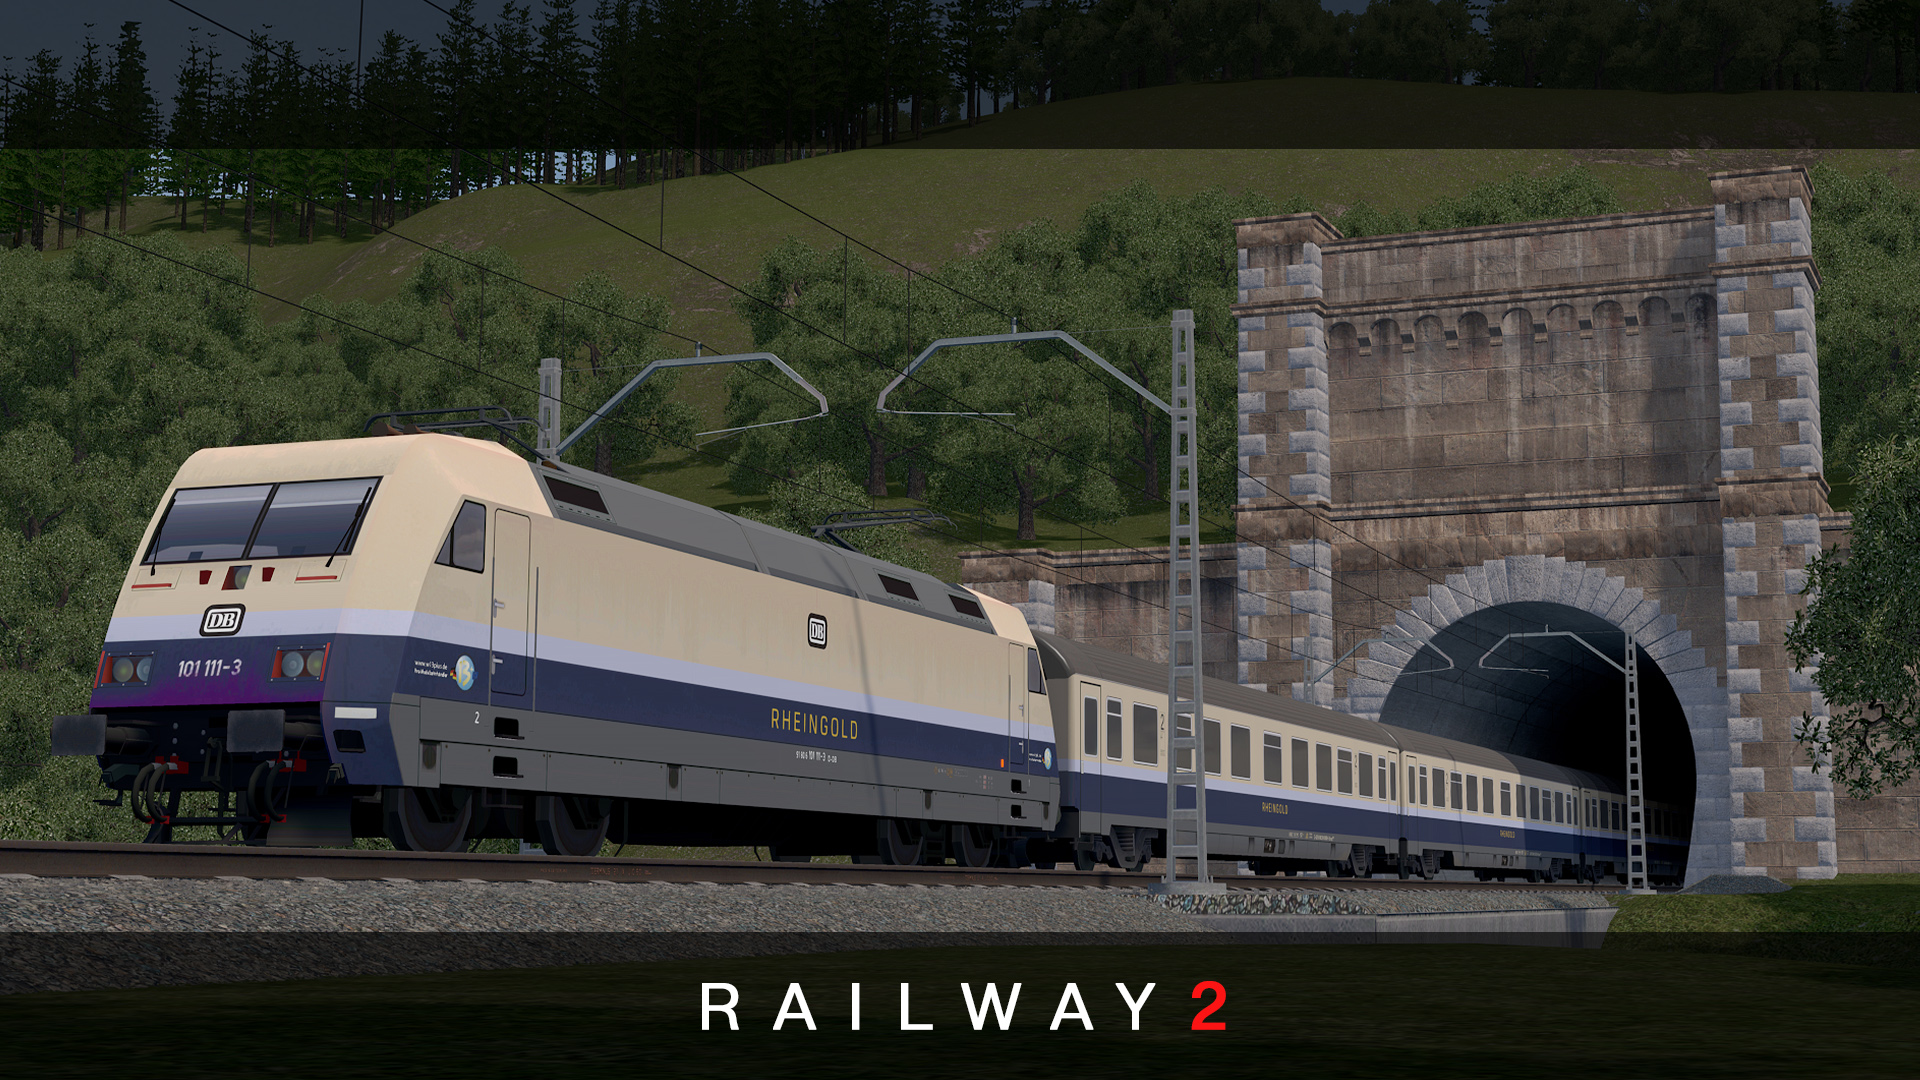 Cities: Skylines List of Railway 2 + Features + Modding Tutorial Information - 4.3 Networks: Types and Variants - 0B2537A